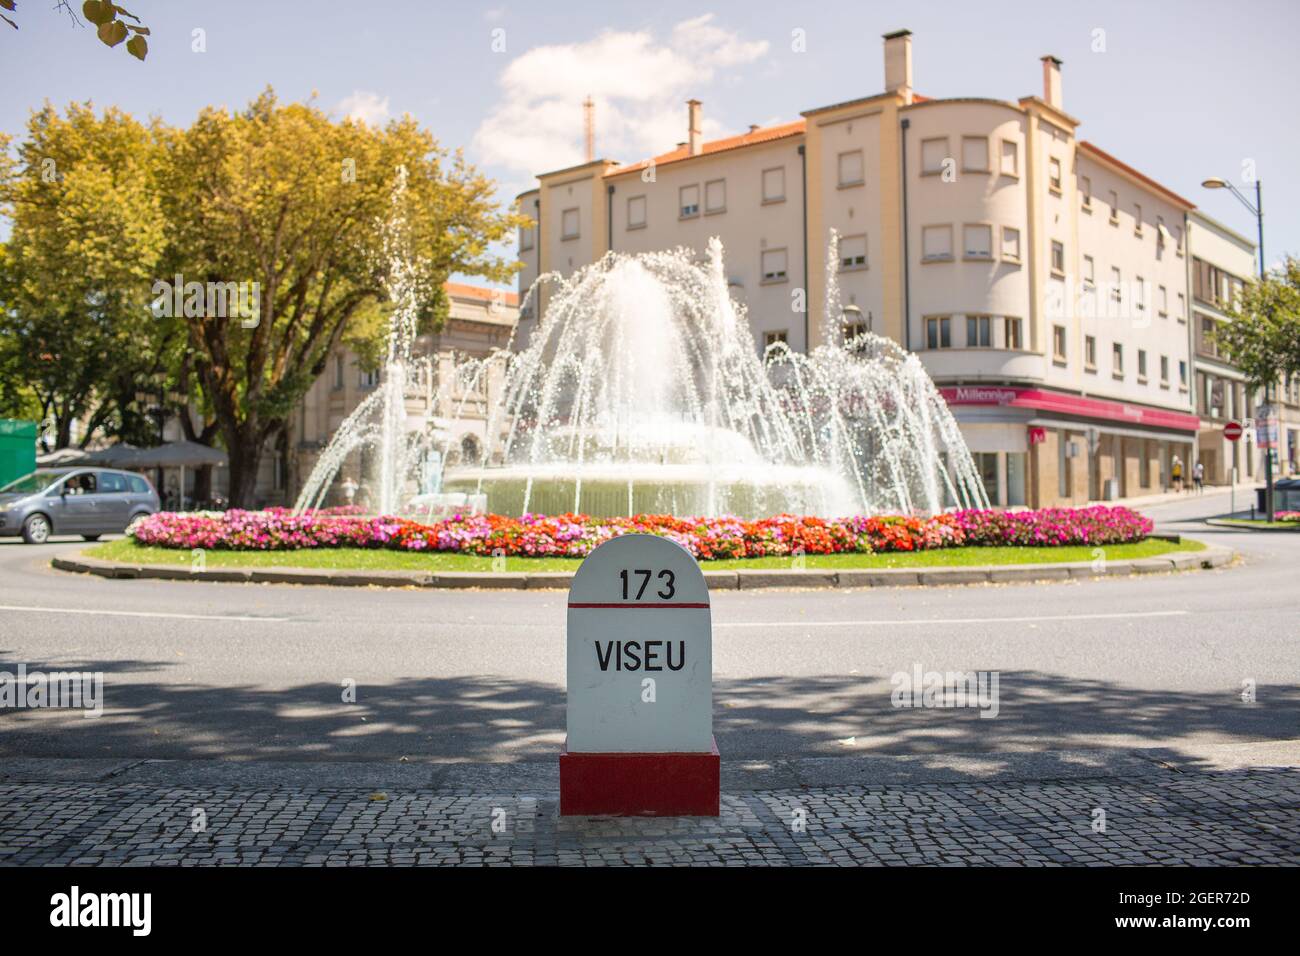 Viseu, Portugal - July 31, 2021: Milestone 173 on 25 de Abril avenue on National Highway 2 as it passes through the city of Viseu. Stock Photo